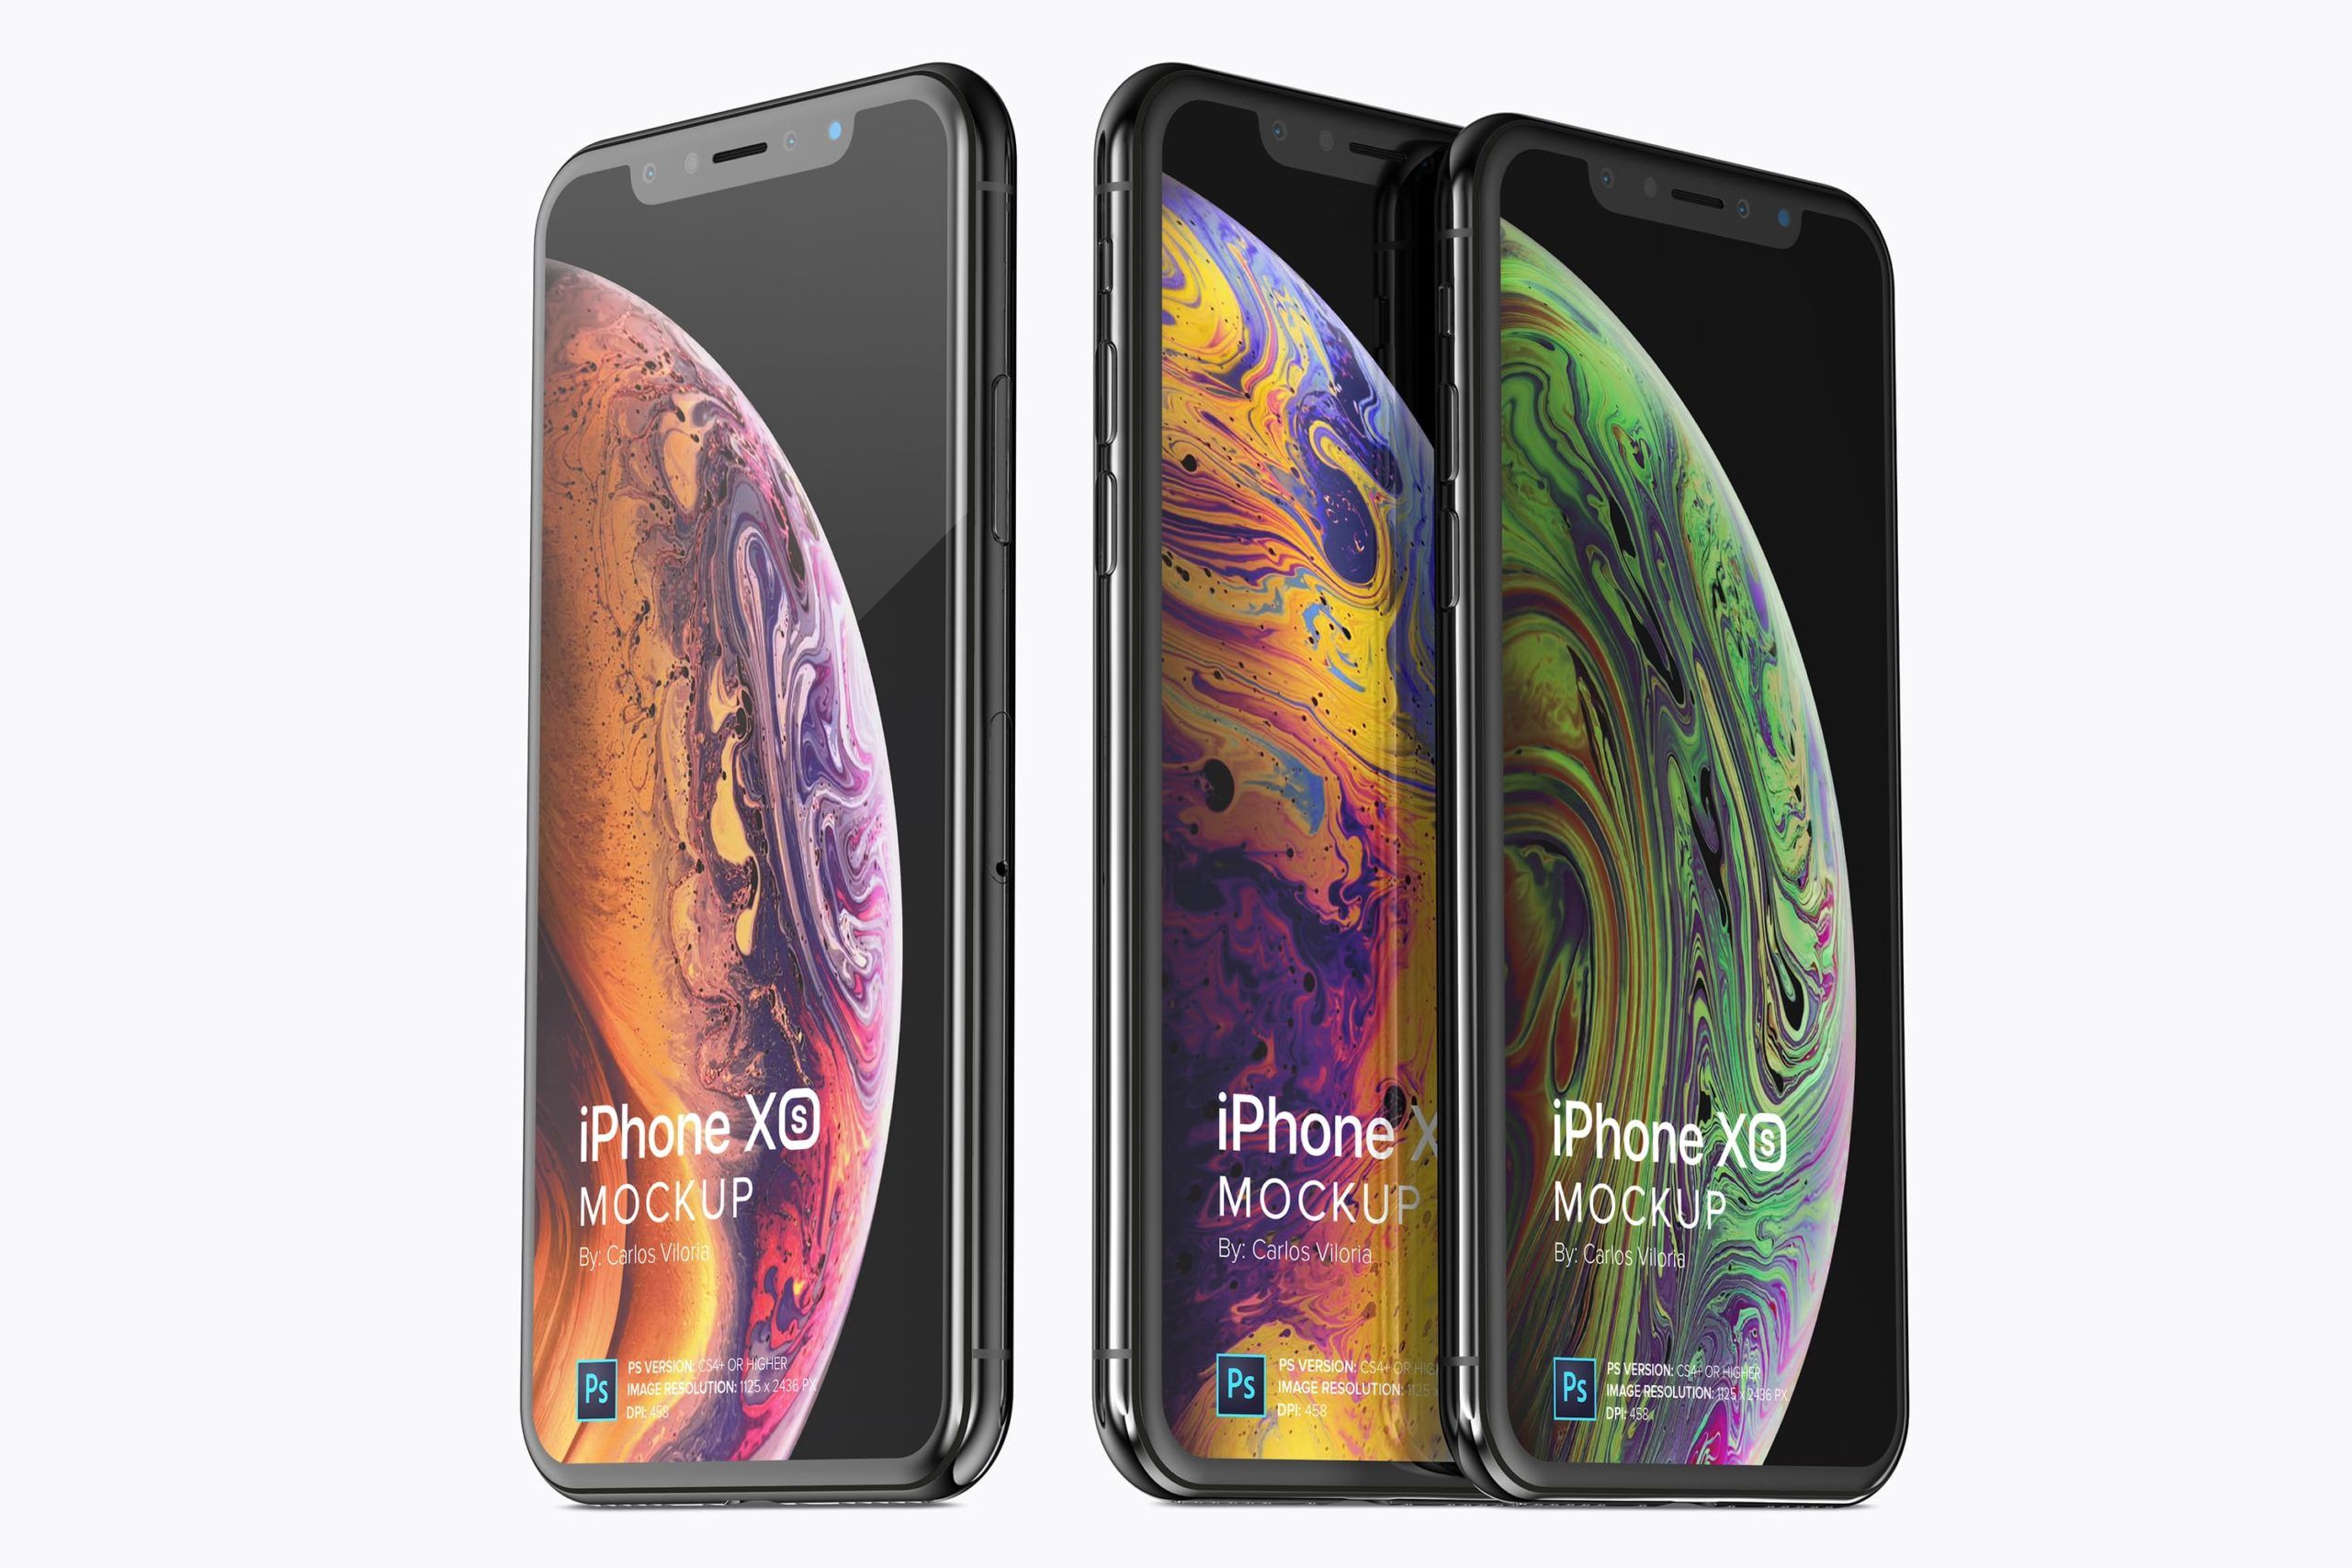 Iphone Xs Mockup for Ios Apps Design